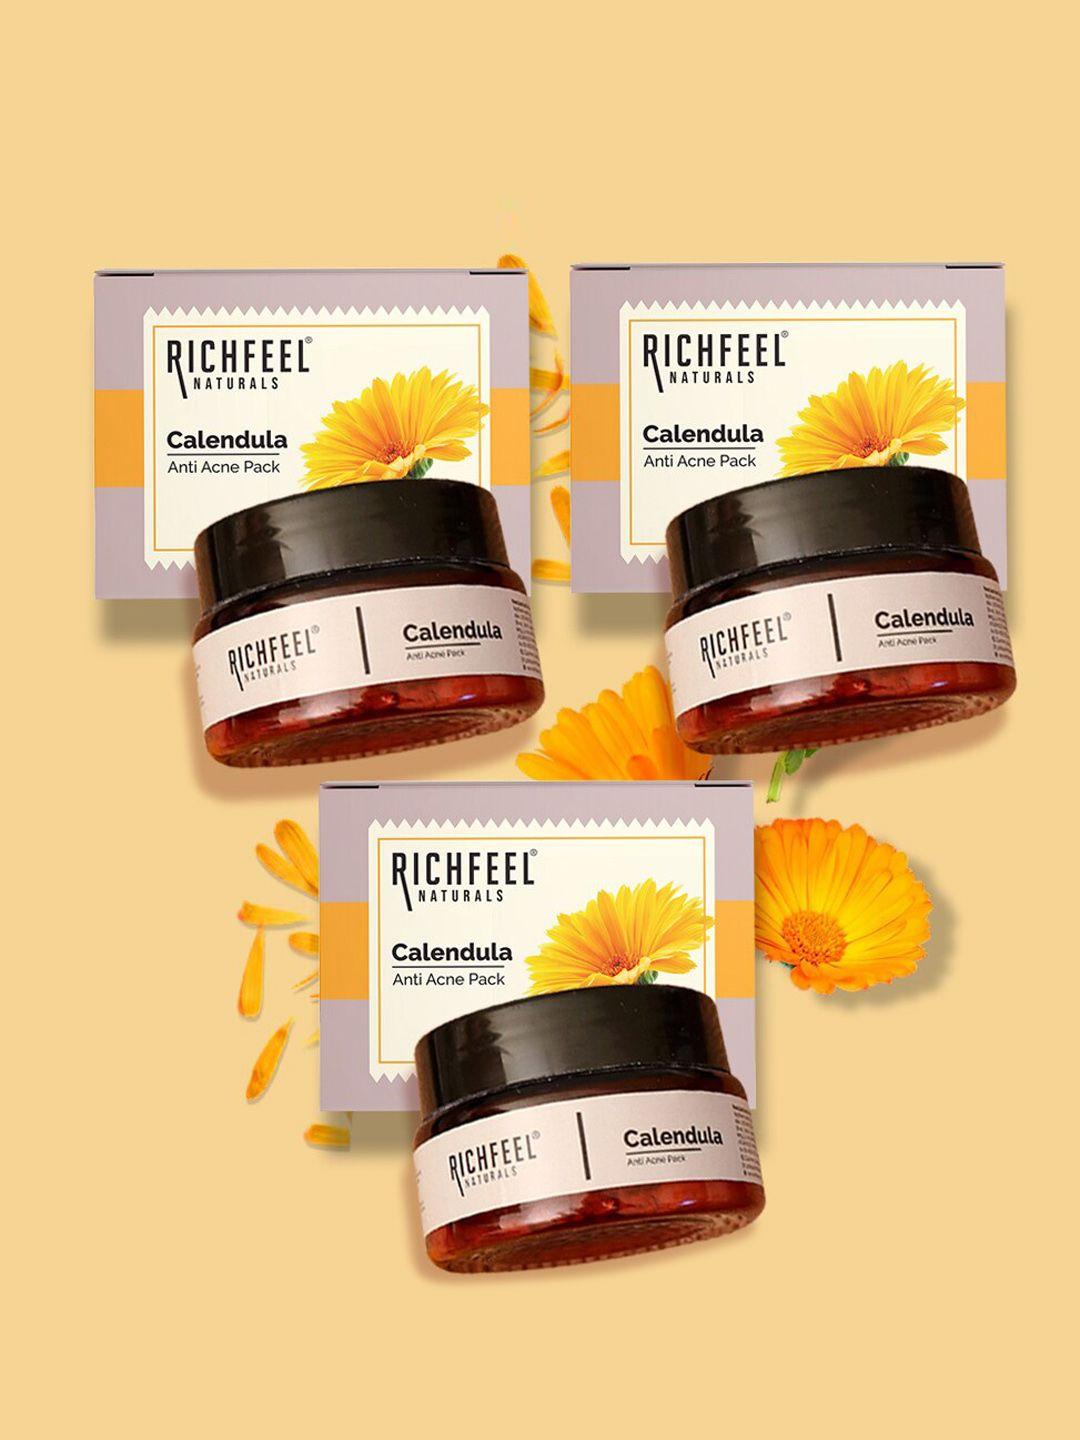 richfeel set of 3 calendula anti-acne face pack with kaolin clay - 50g each